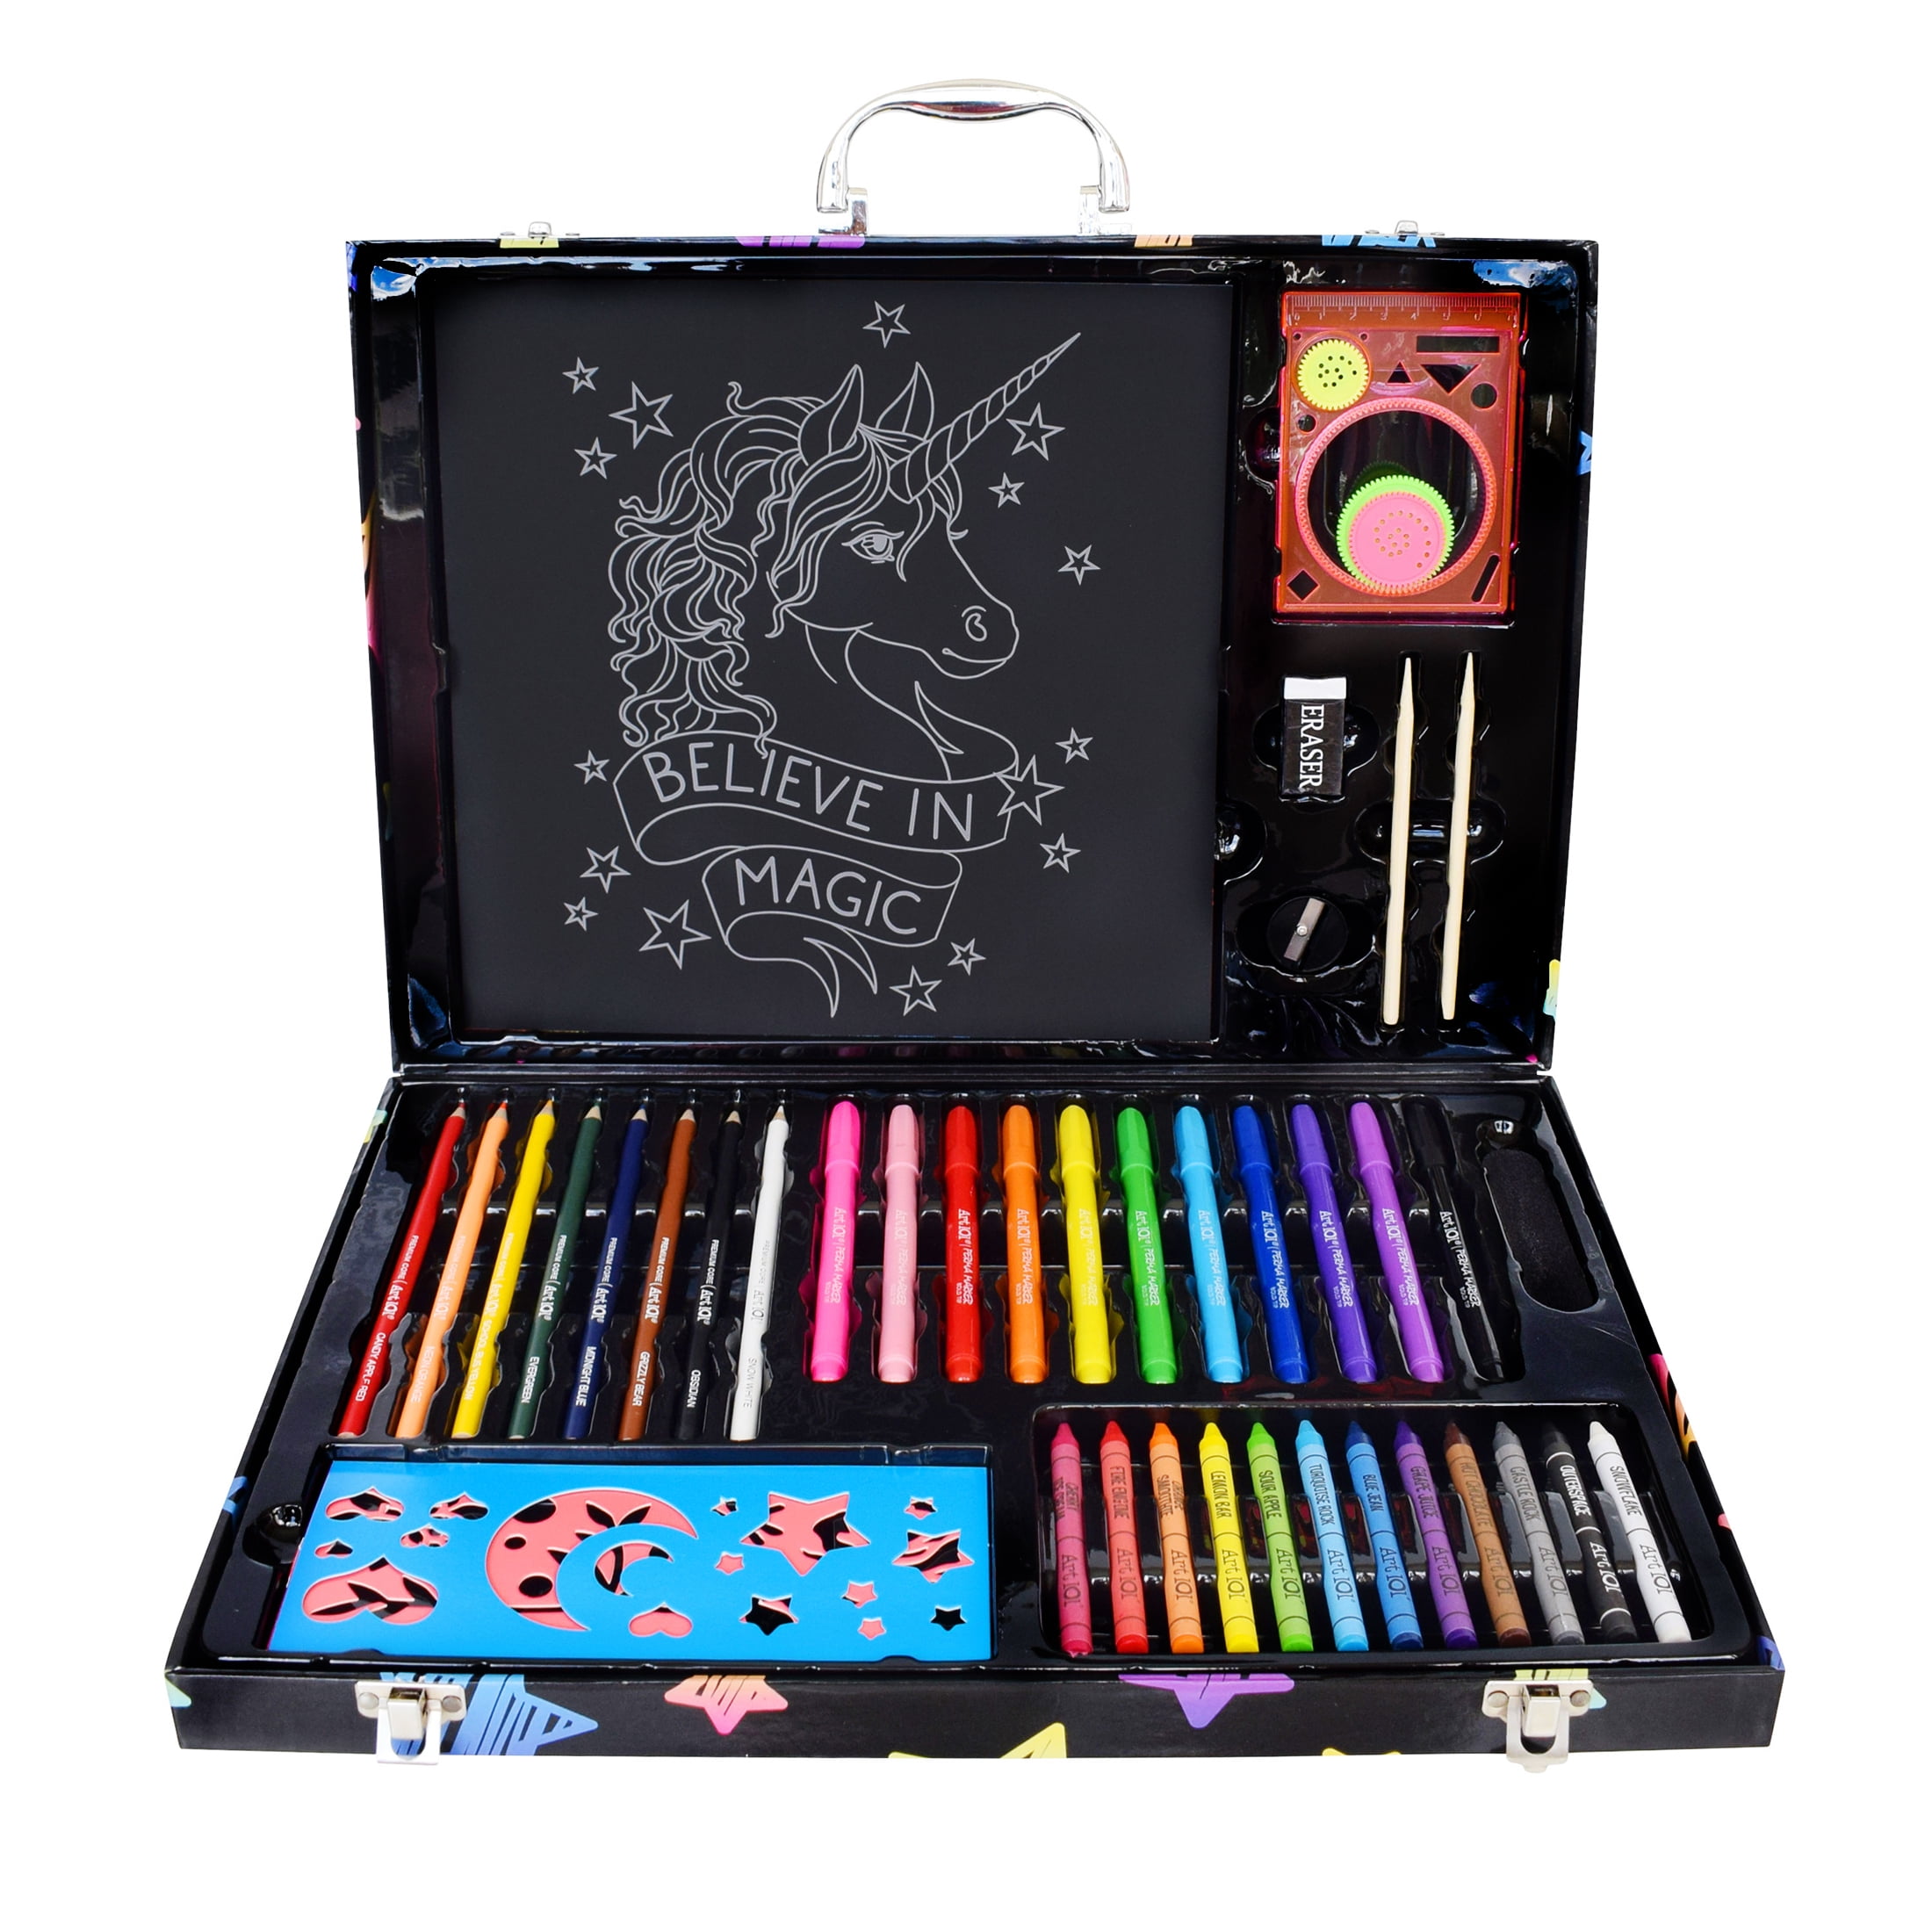 Ultimate Scratch Kit with 126 pieces - AOO30126MB, Art 101 / Advantus